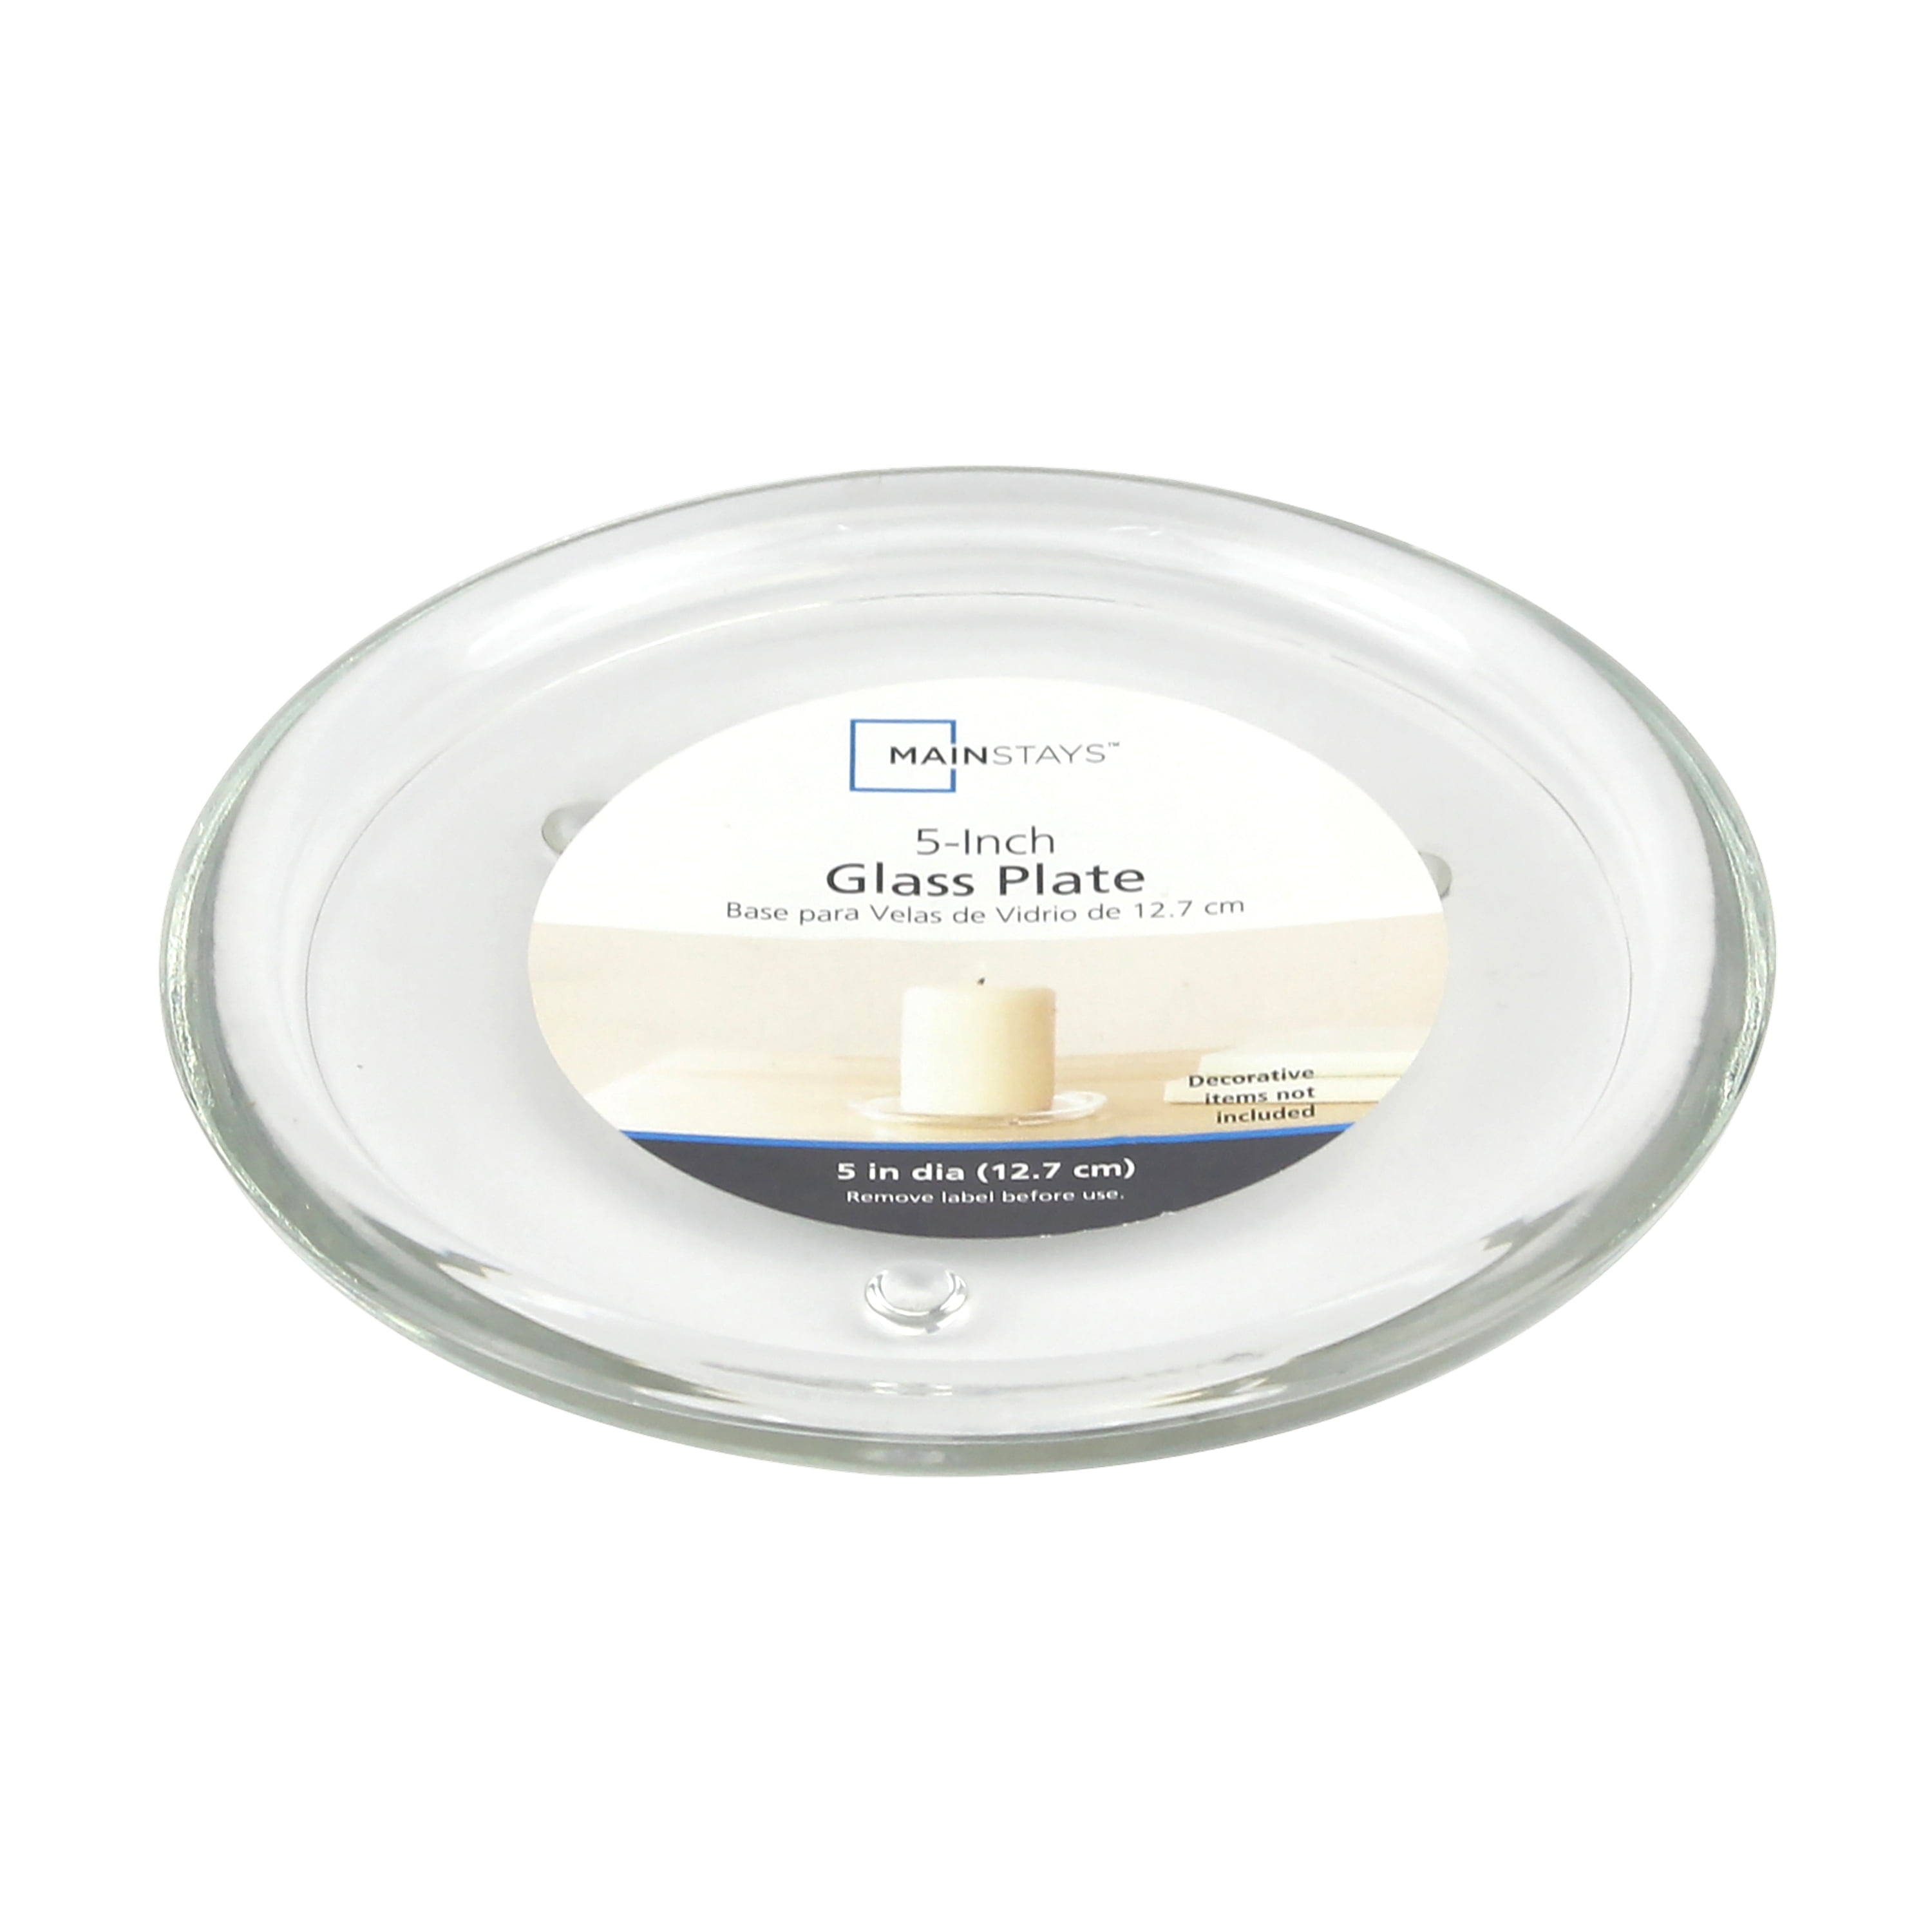 Mainstays 5 Inch Decorative Candle Holder Plate, Clear